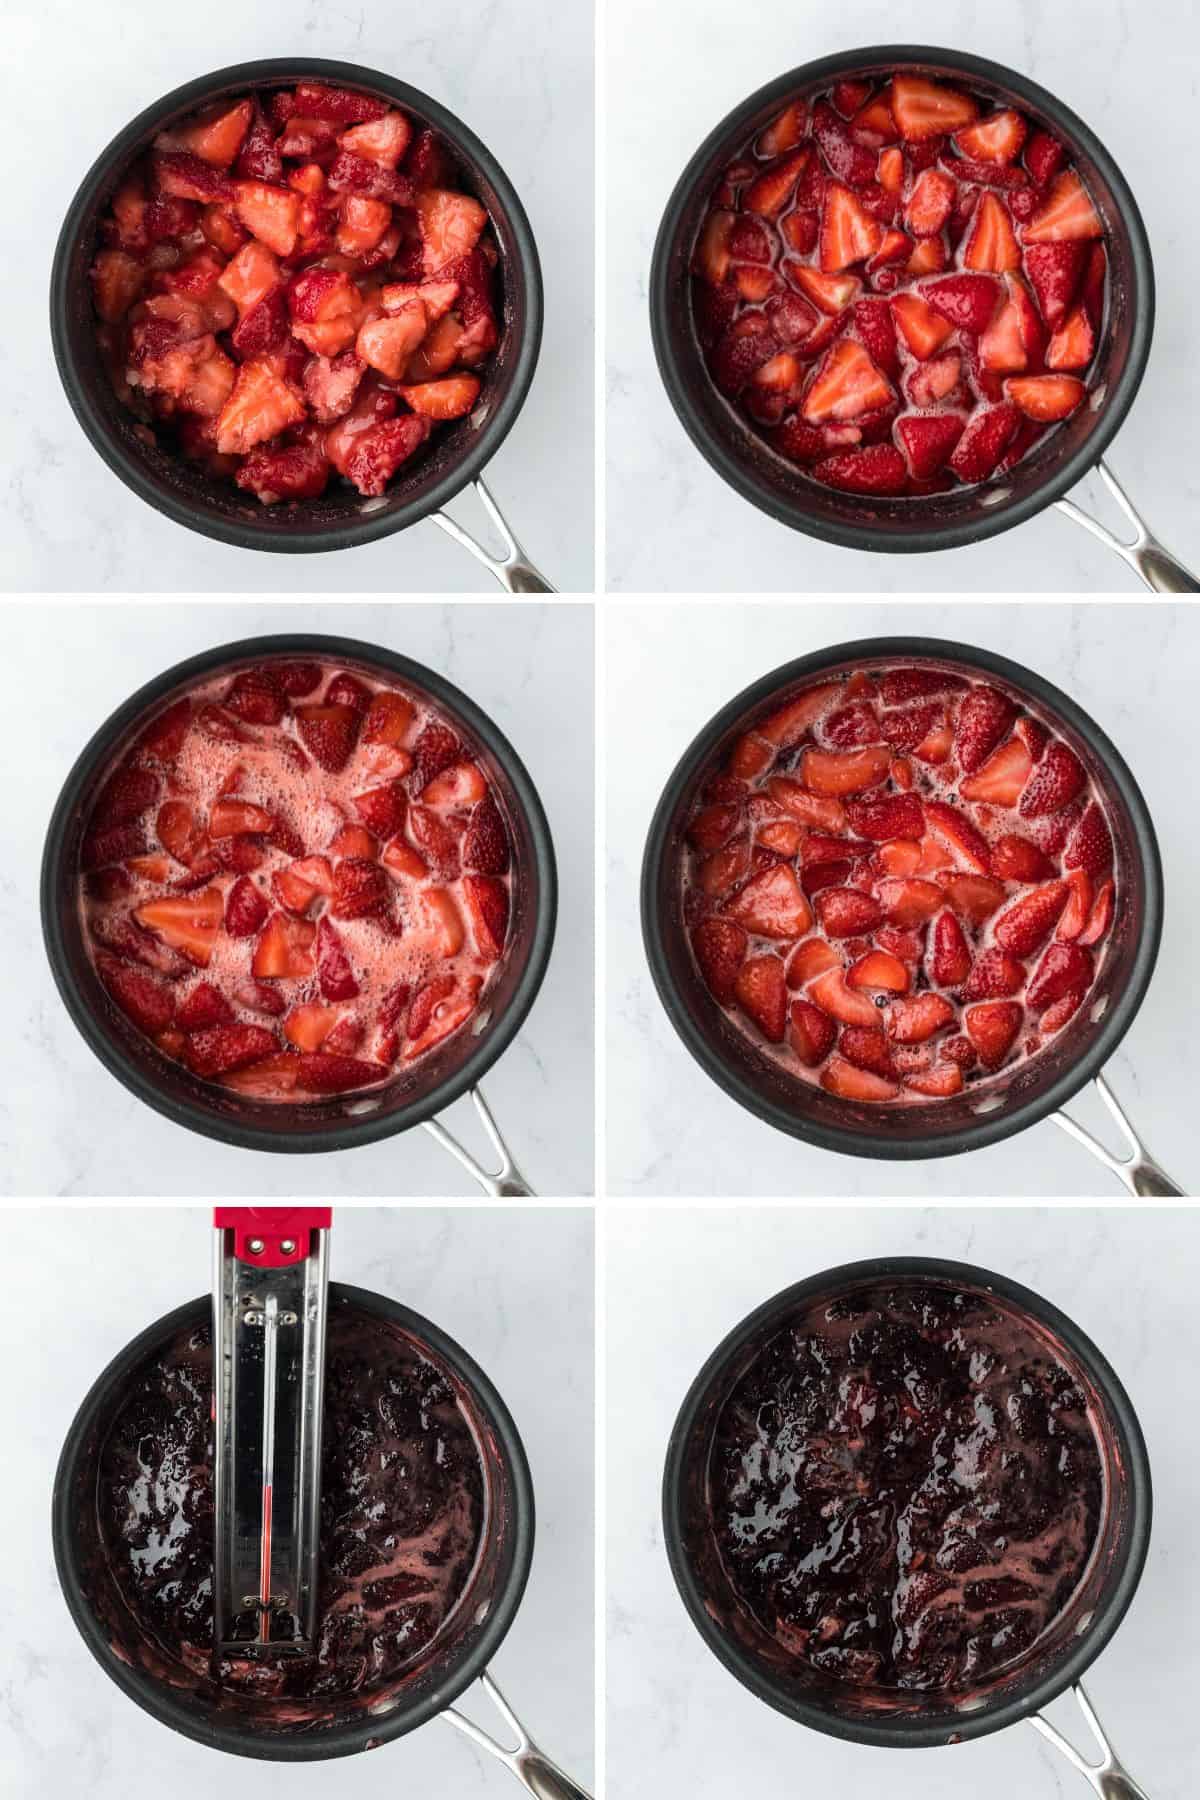 A step by step image collage on how to make strawberry preserves with mixing all the ingredients, letting them boil, skimming the mixture, and checking the temperature of the preserves with a thermometer